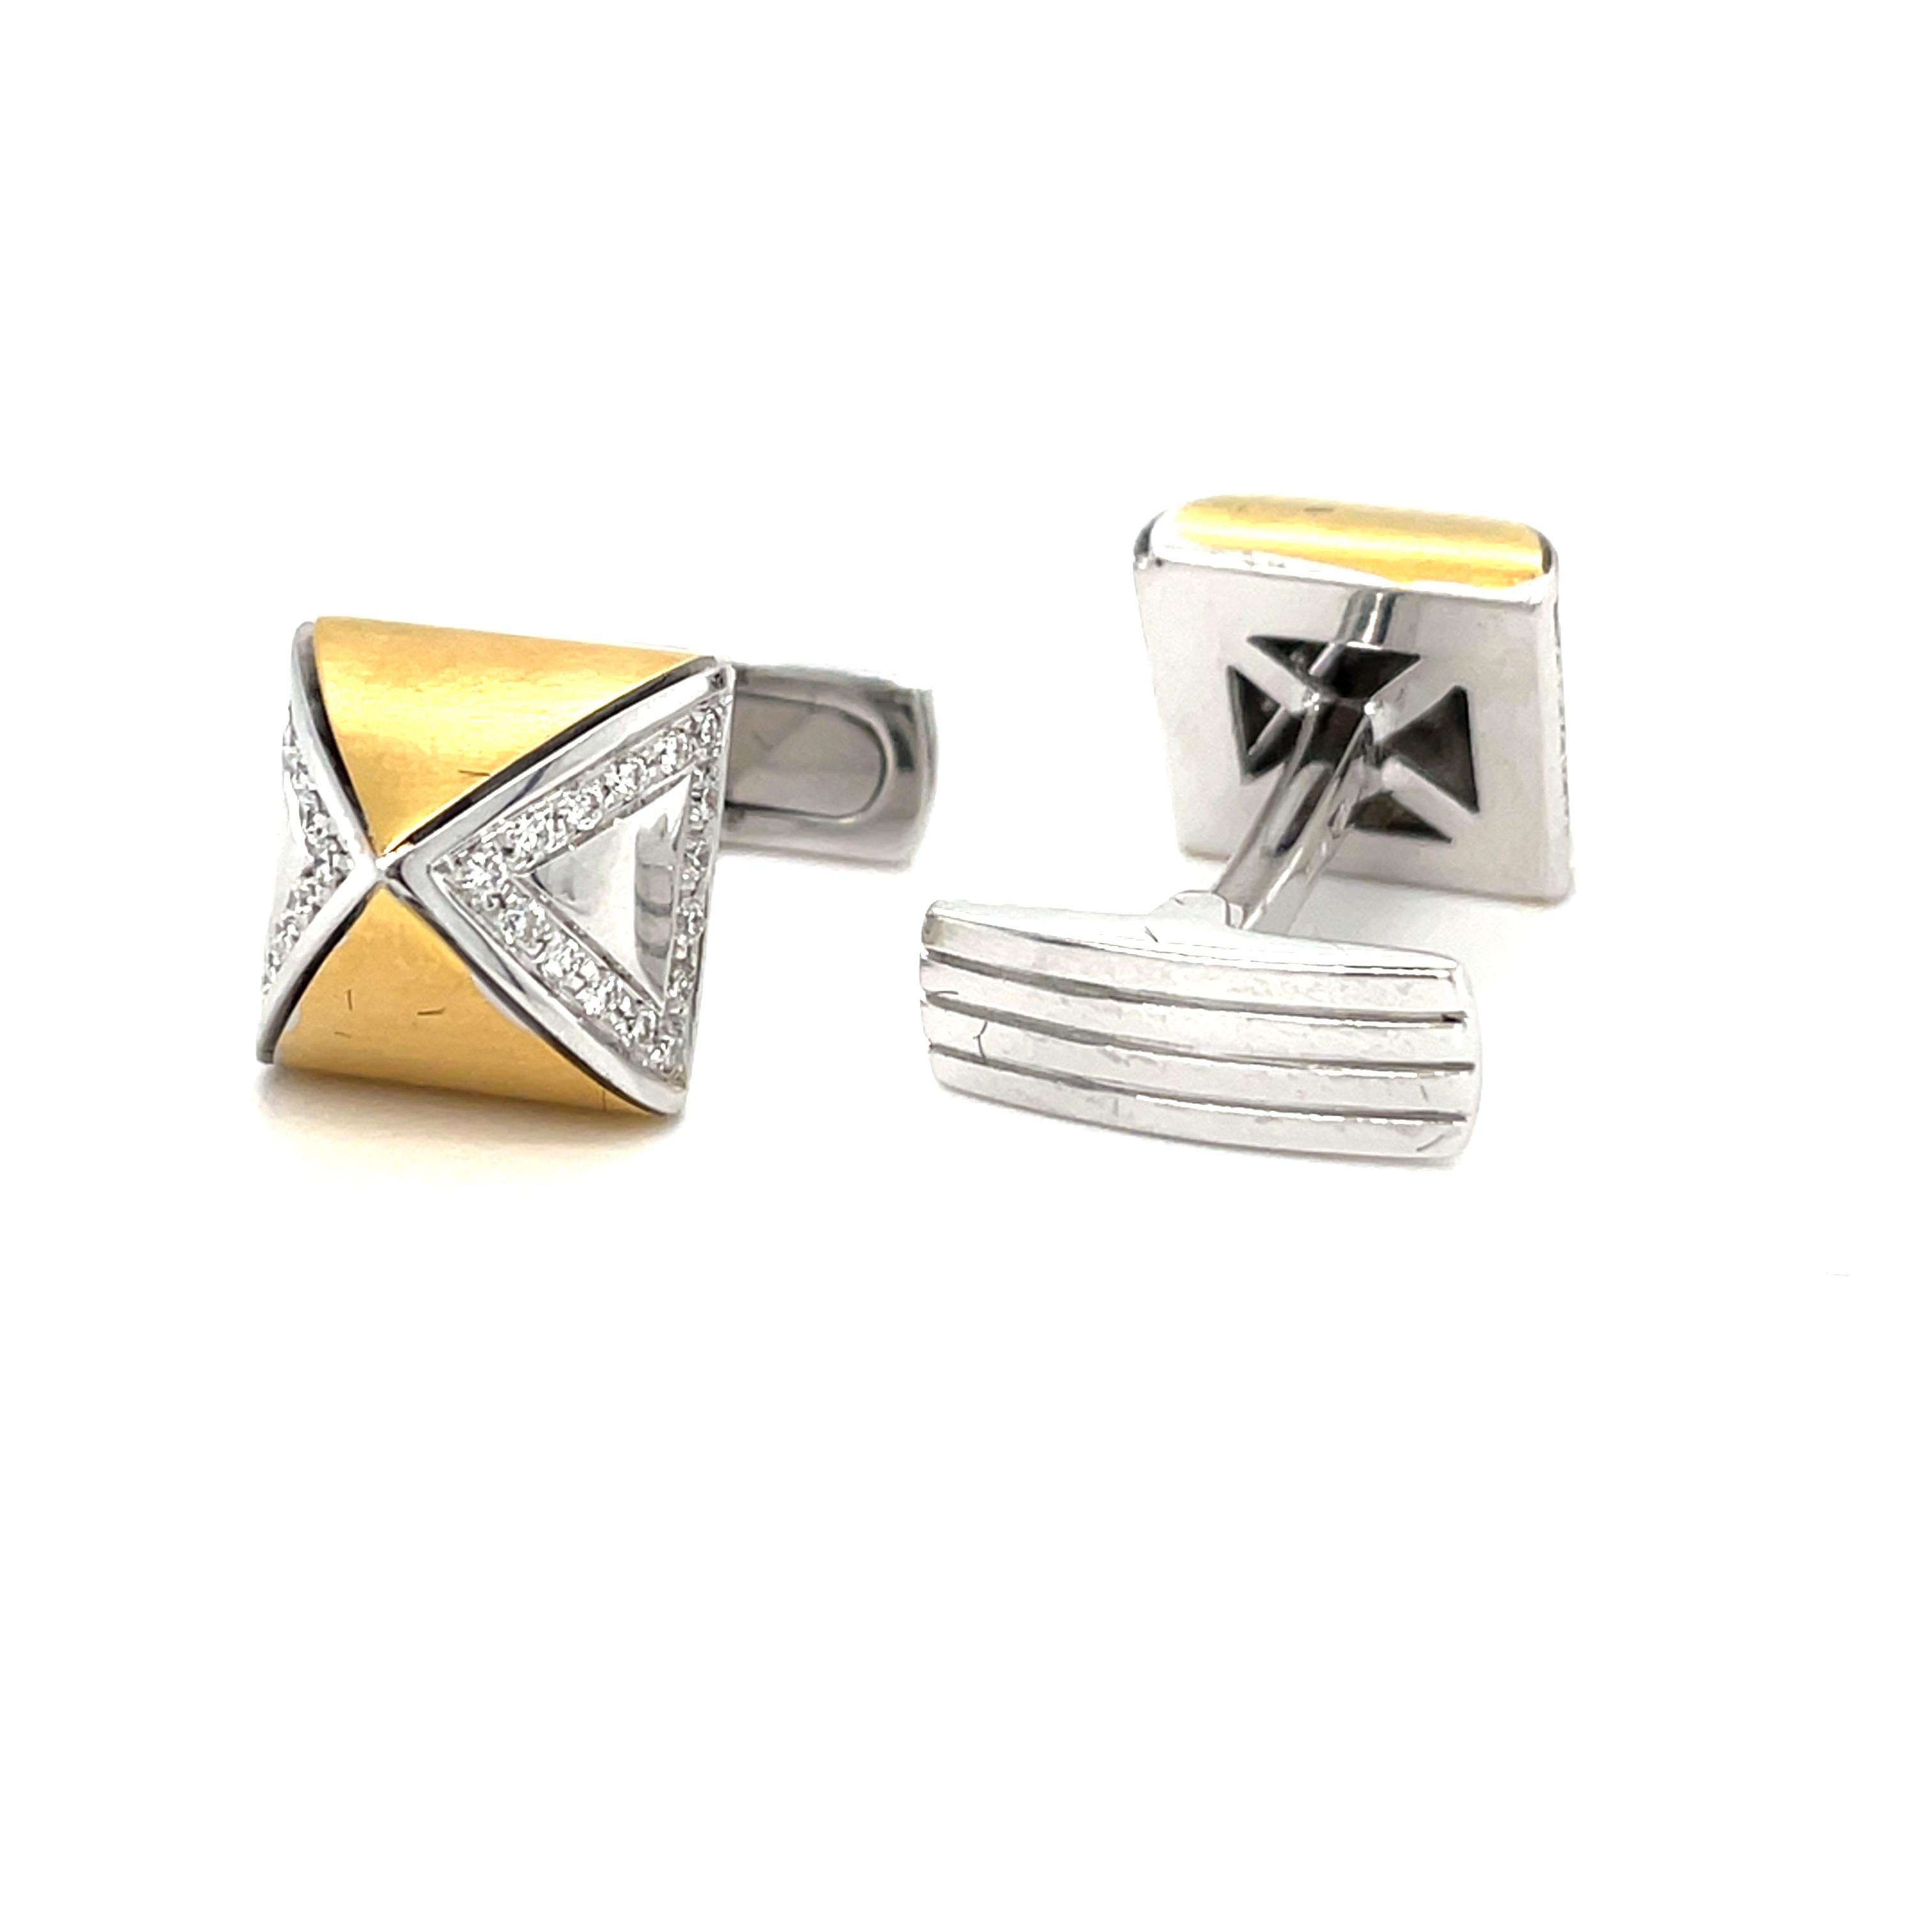 These white and yelllow gold cufflinks are from Men's Collection. These cufflinks are decorated with diamonds G color VS clarity. The total amount of diamonds is 0.53 Carat. The dimensions of the cufflinks are 1.2cm x 1.2cm. These cufflinks are a